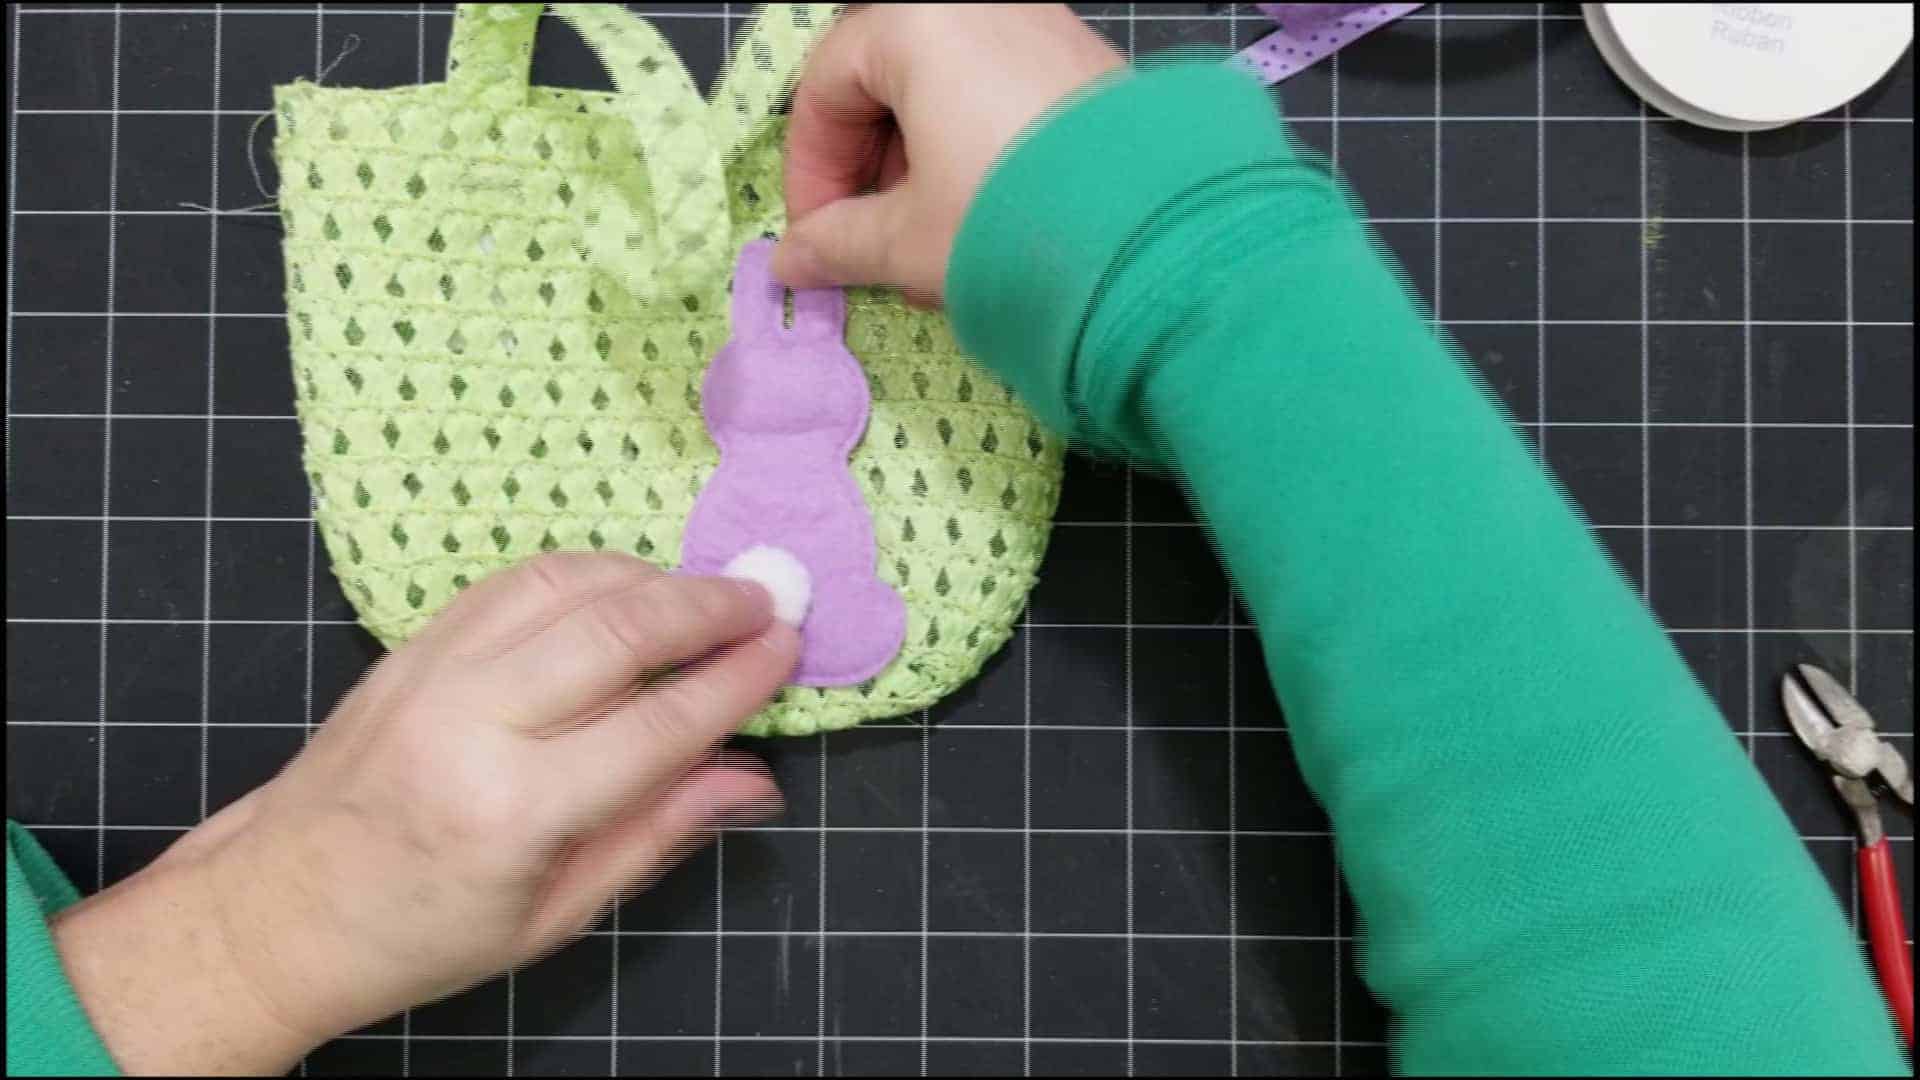 Placing the bunny face down onto the little purse basket.